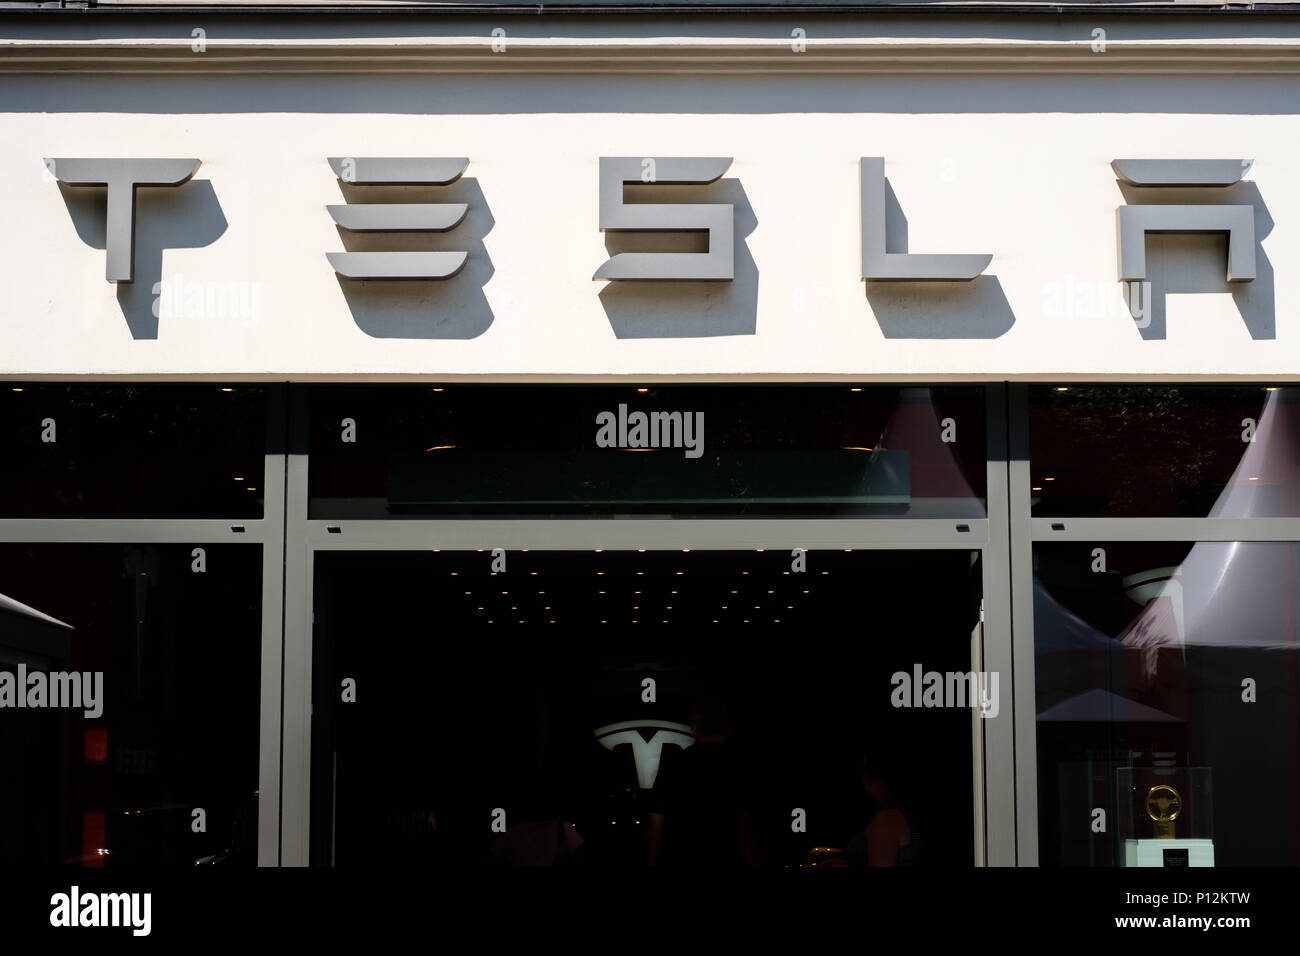 Berlin, Germany - june  2018: Tesla logo / brand name on shop facade in Berlin. Tesla, Inc.  is an American multinational corporation specialized in e Stock Photo